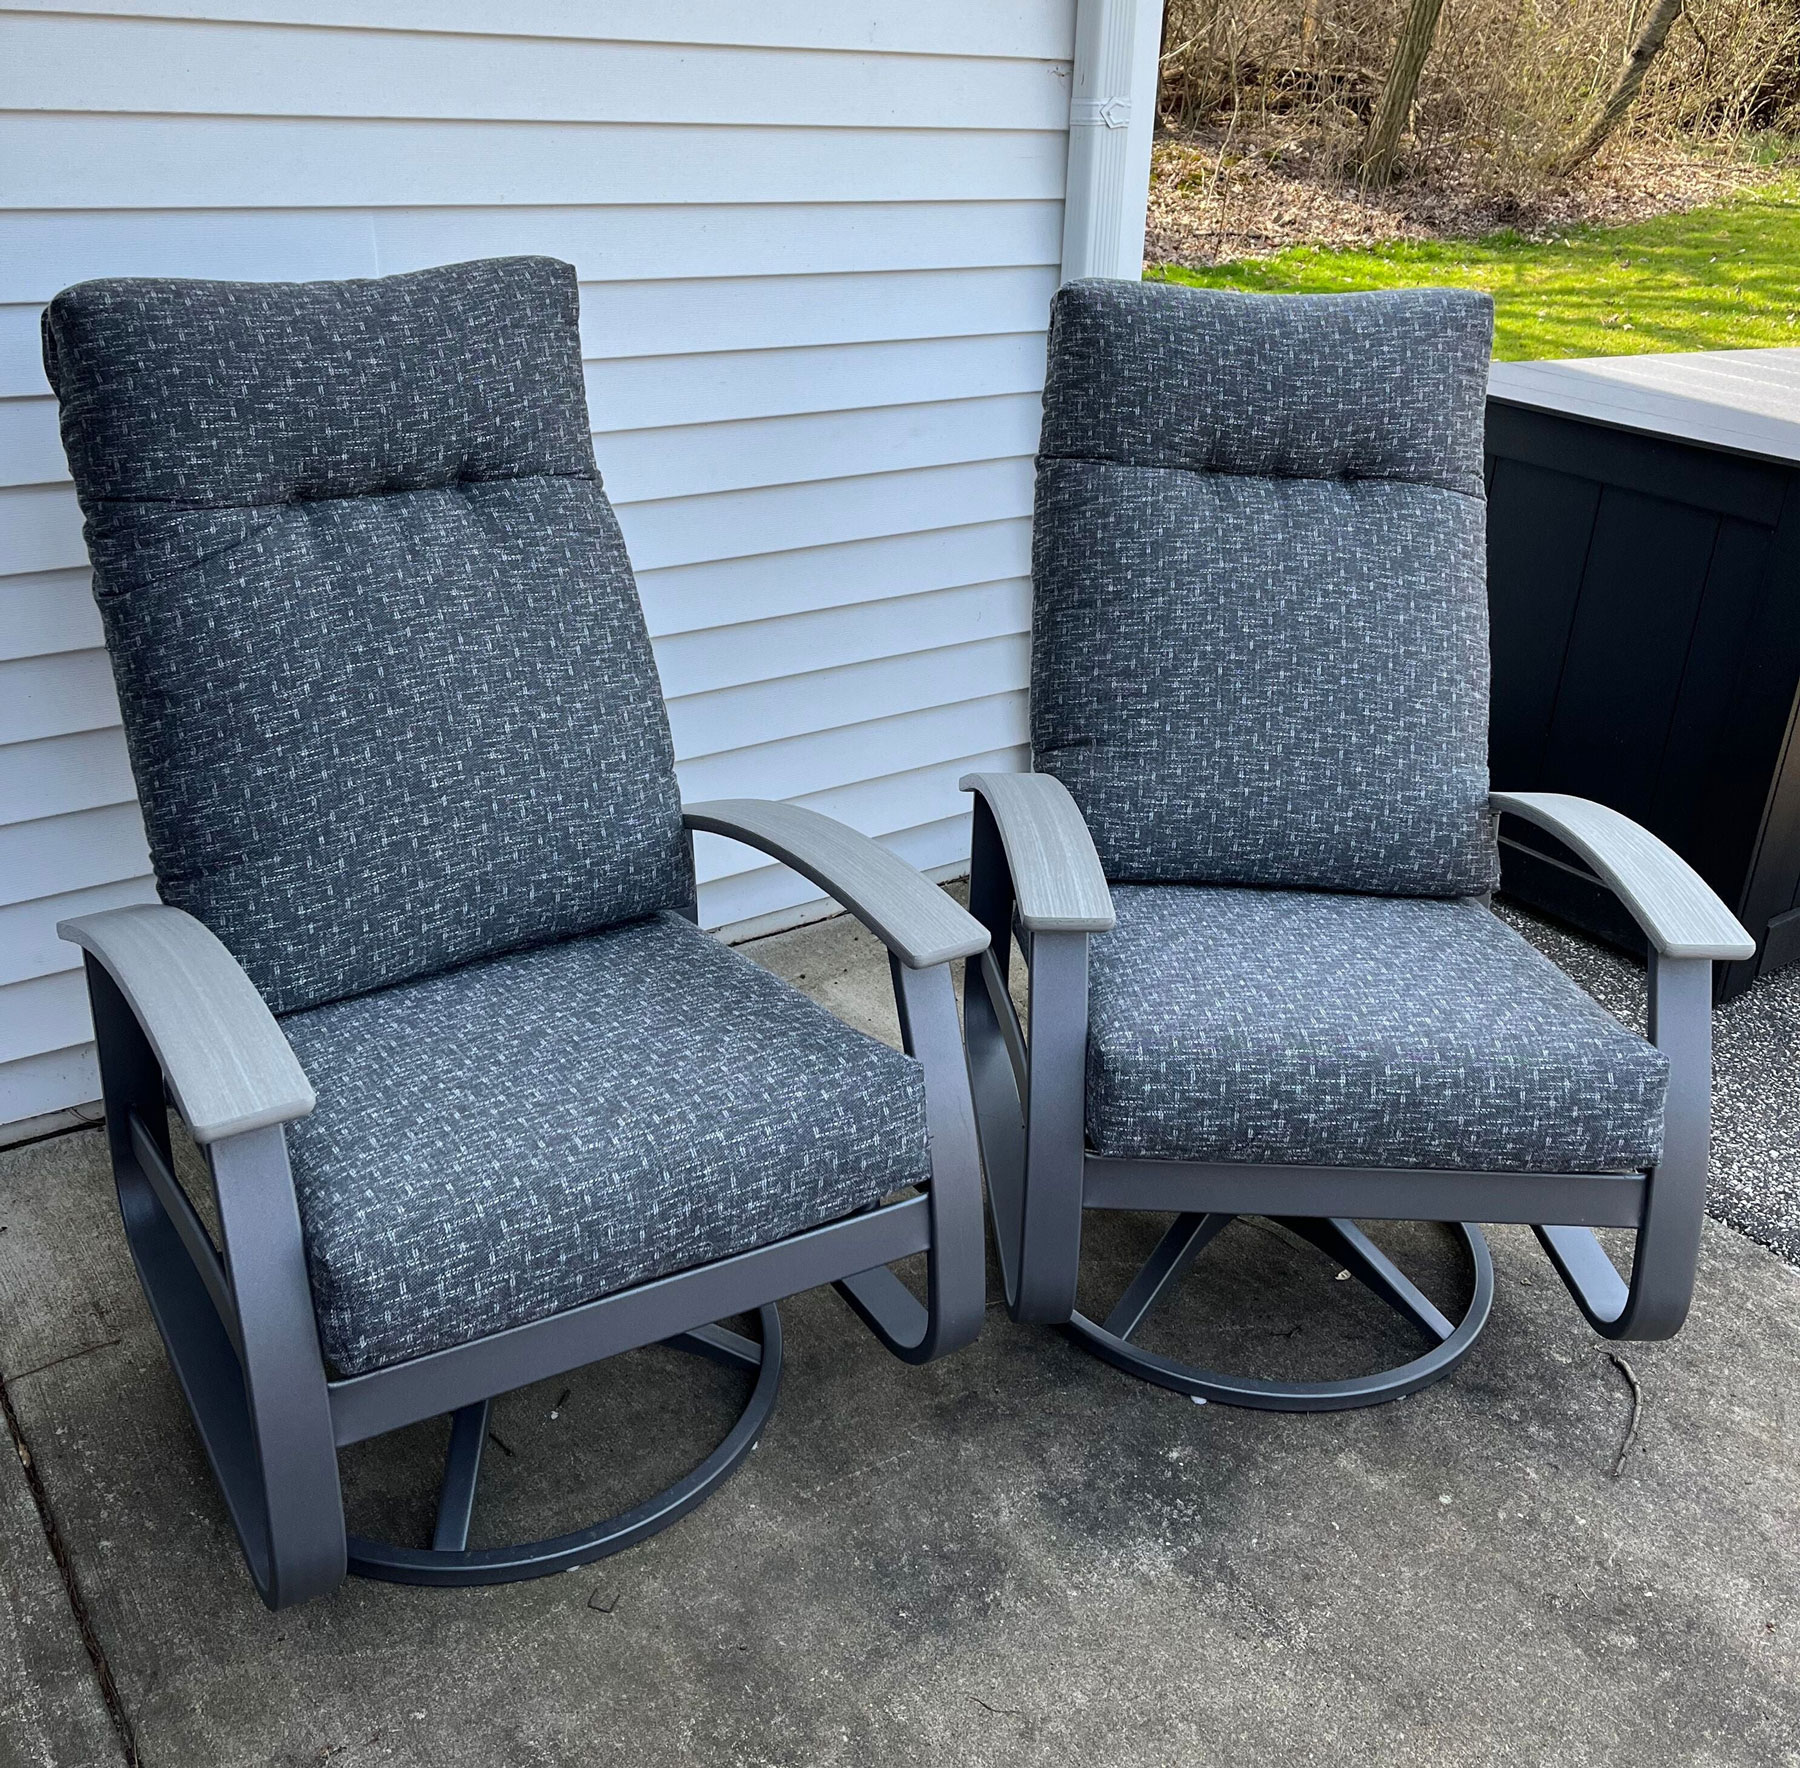 (2) Telescope Casual Belle Isle Supreme Cushion Swivel Rockers in Hither Char Fabric